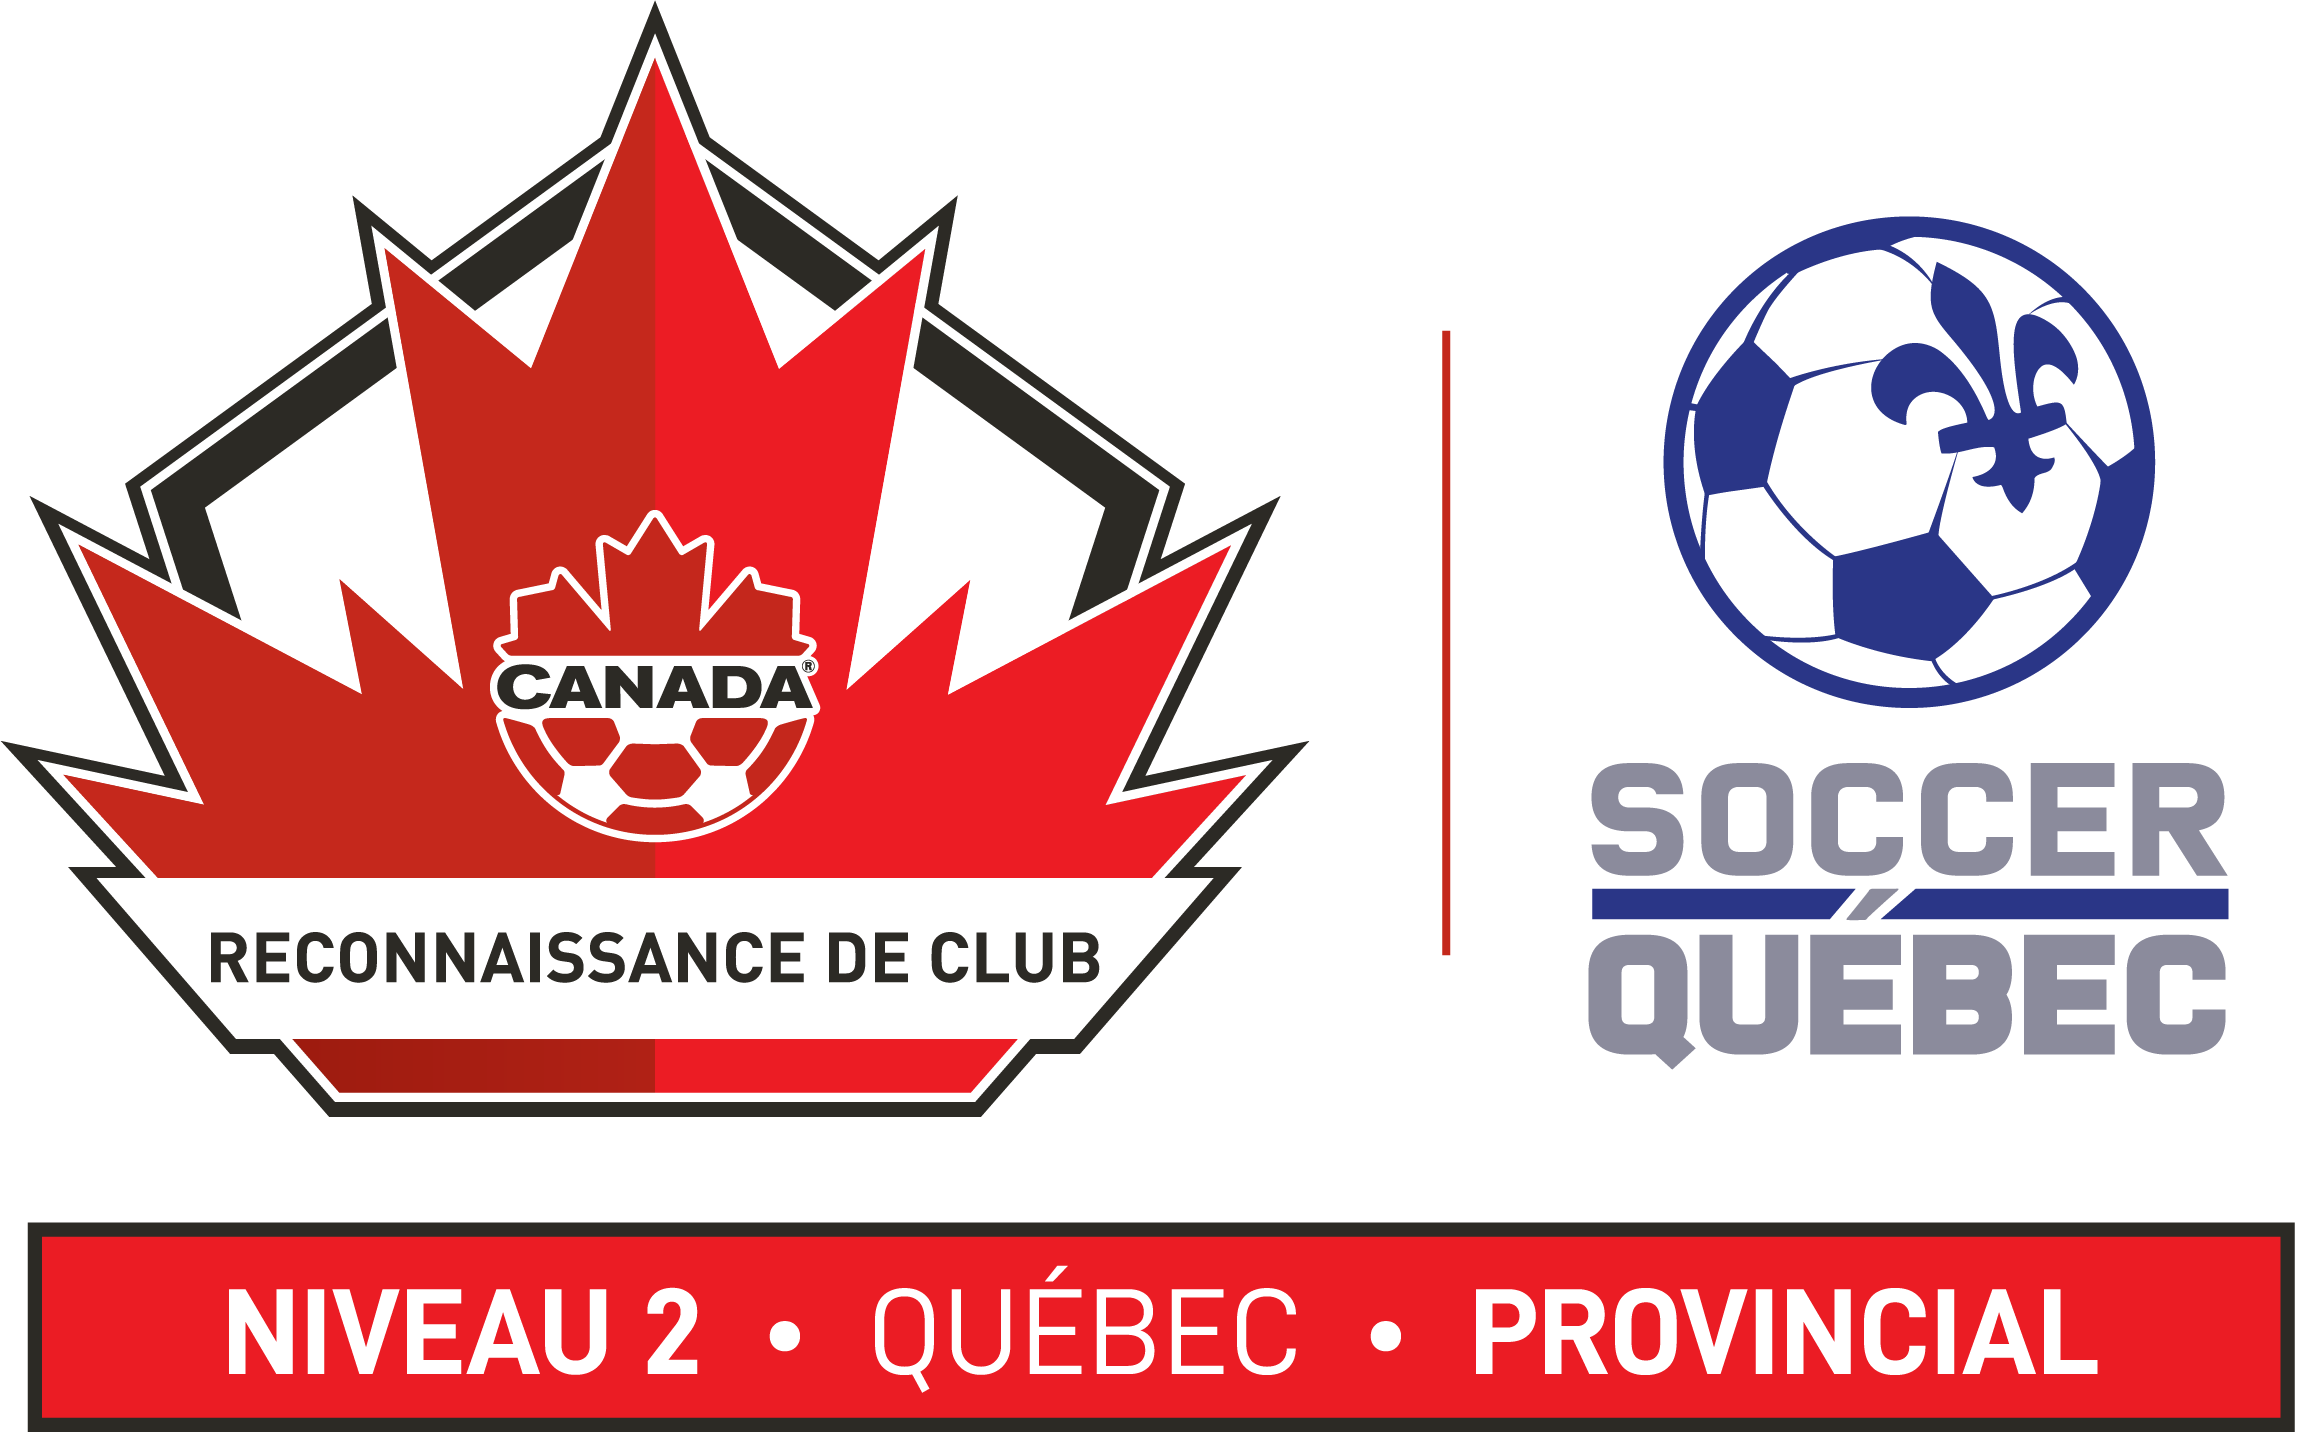 Communication From Csa Canada Soccer Club Licensing Program Expands With Adoption Of Quebec Based Clubs Csrdp